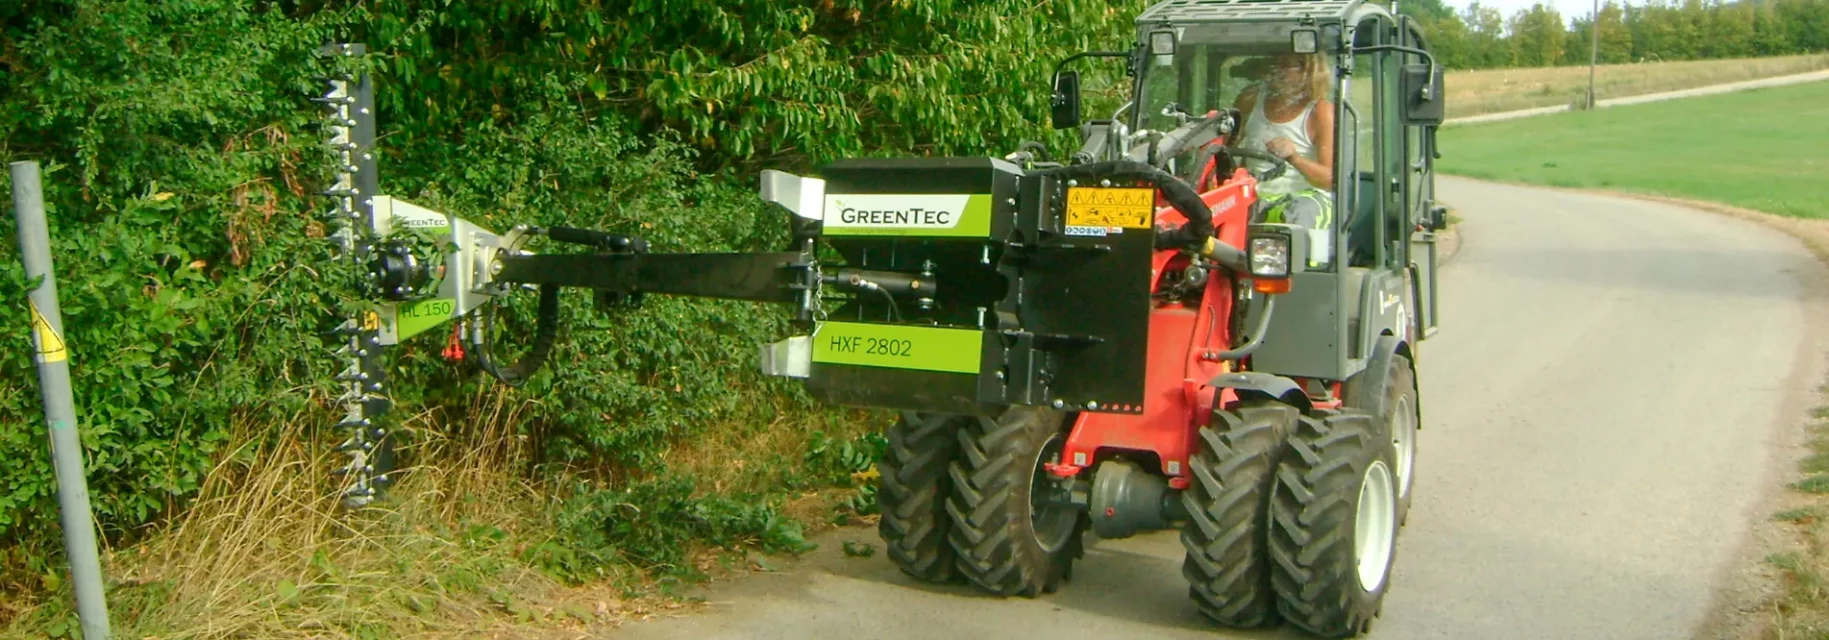 Hydraulic hedge trimmer mounted on skid steer loader